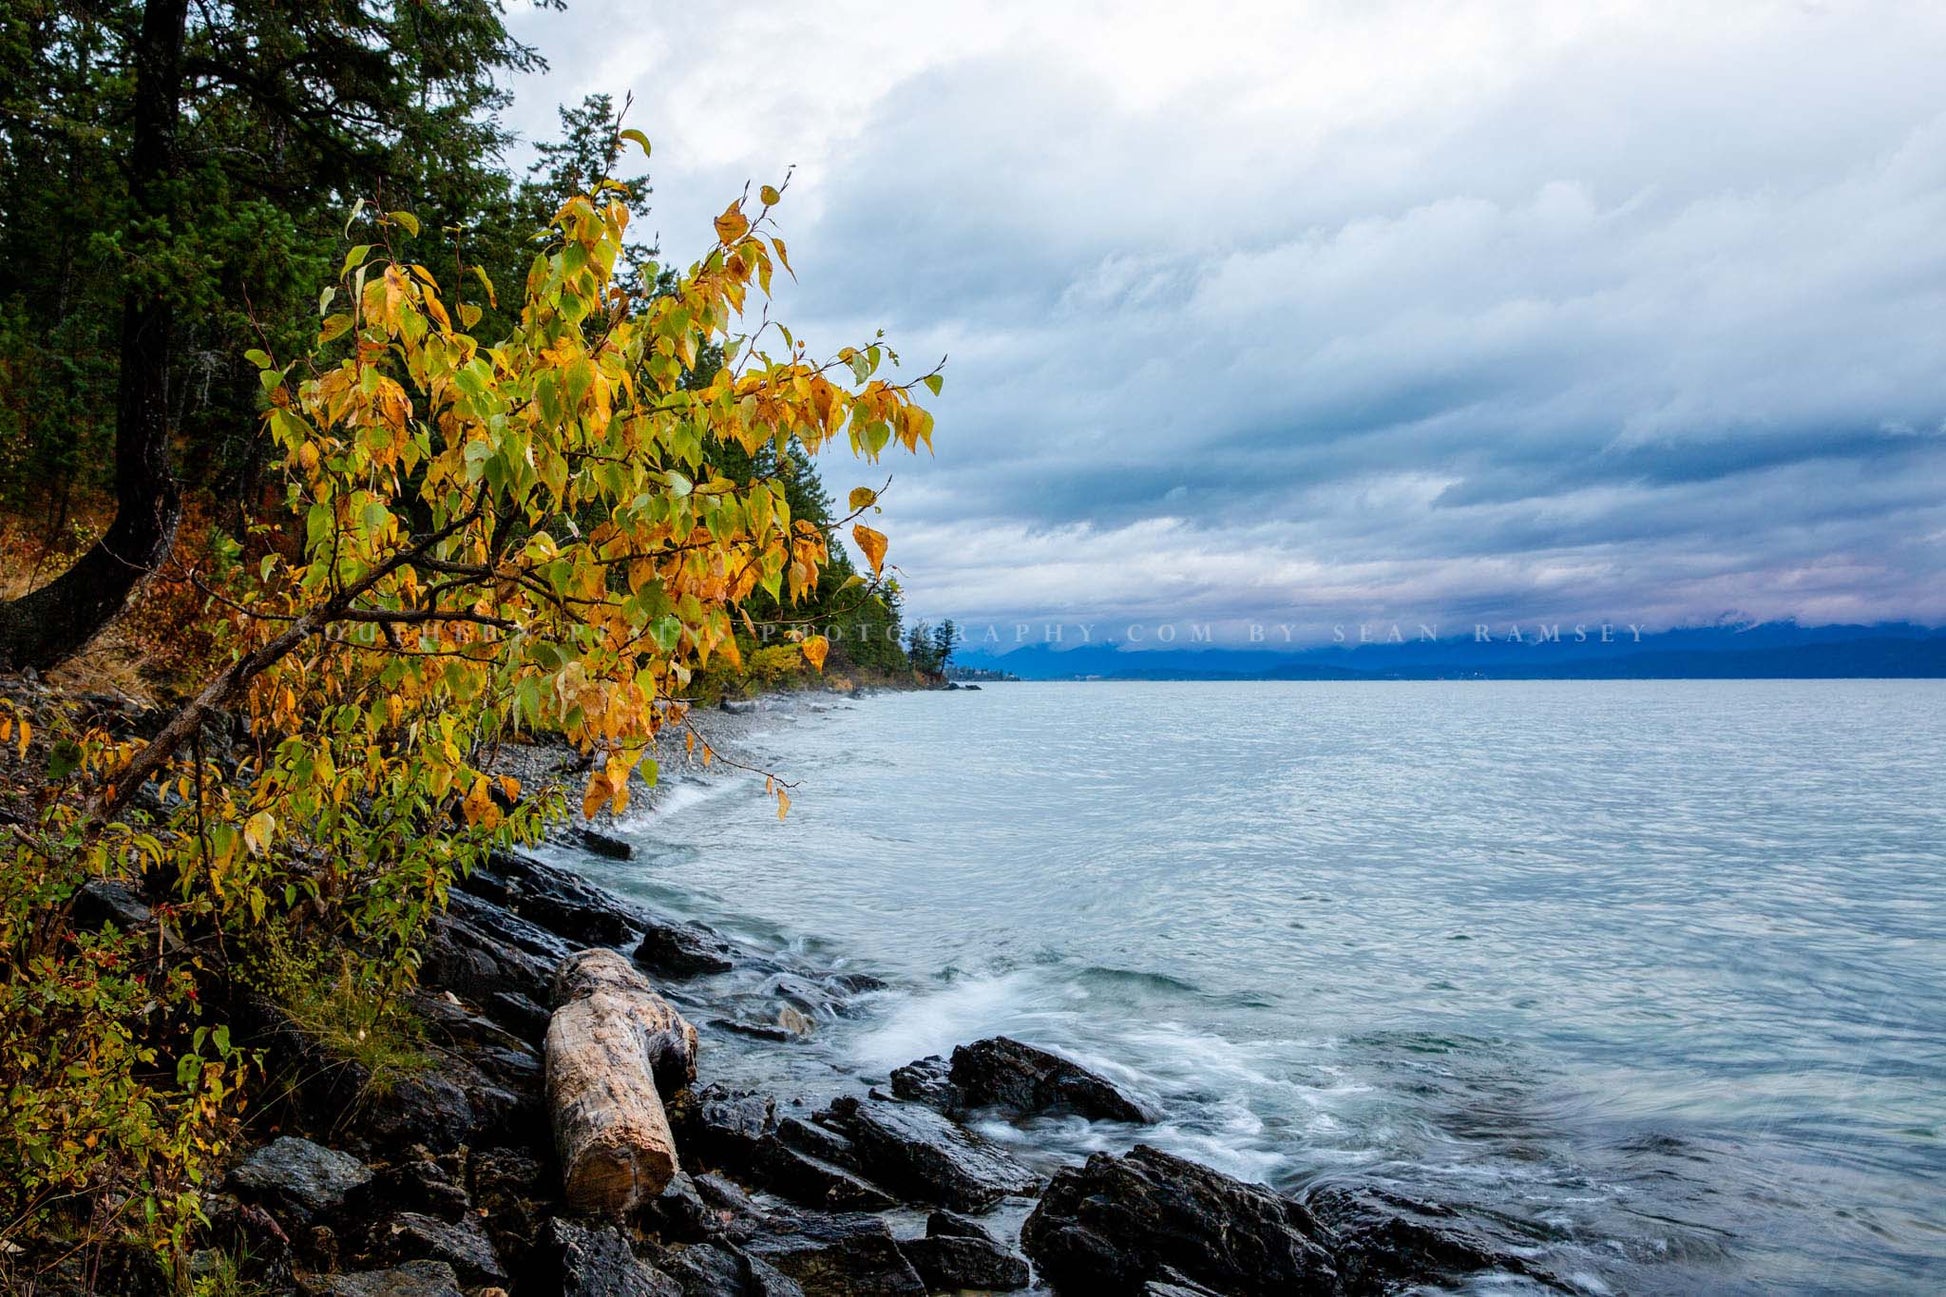 Northern Rockies photography print of fall foliage in the trees as a log rests along the shoreline of Flathead Lake on an autumn morning in Montana by Sean Ramsey of Southern Plains Photography.